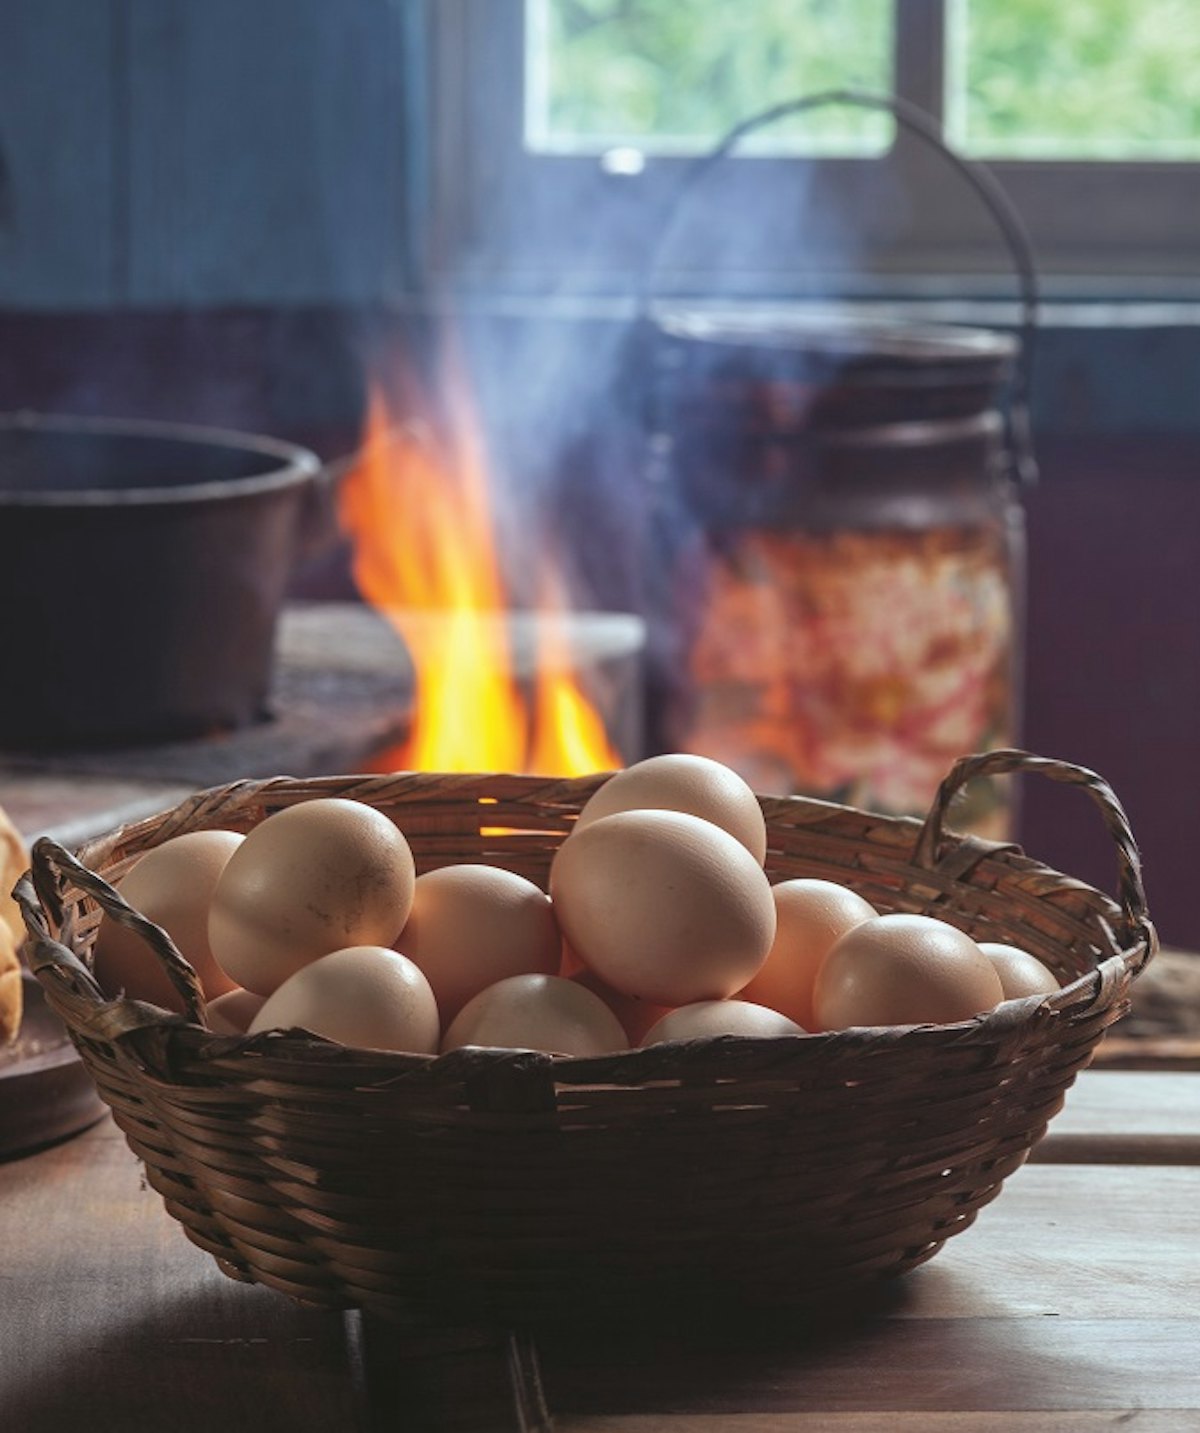 New tray design reduces egg breakage in Brazil's demanding conditions